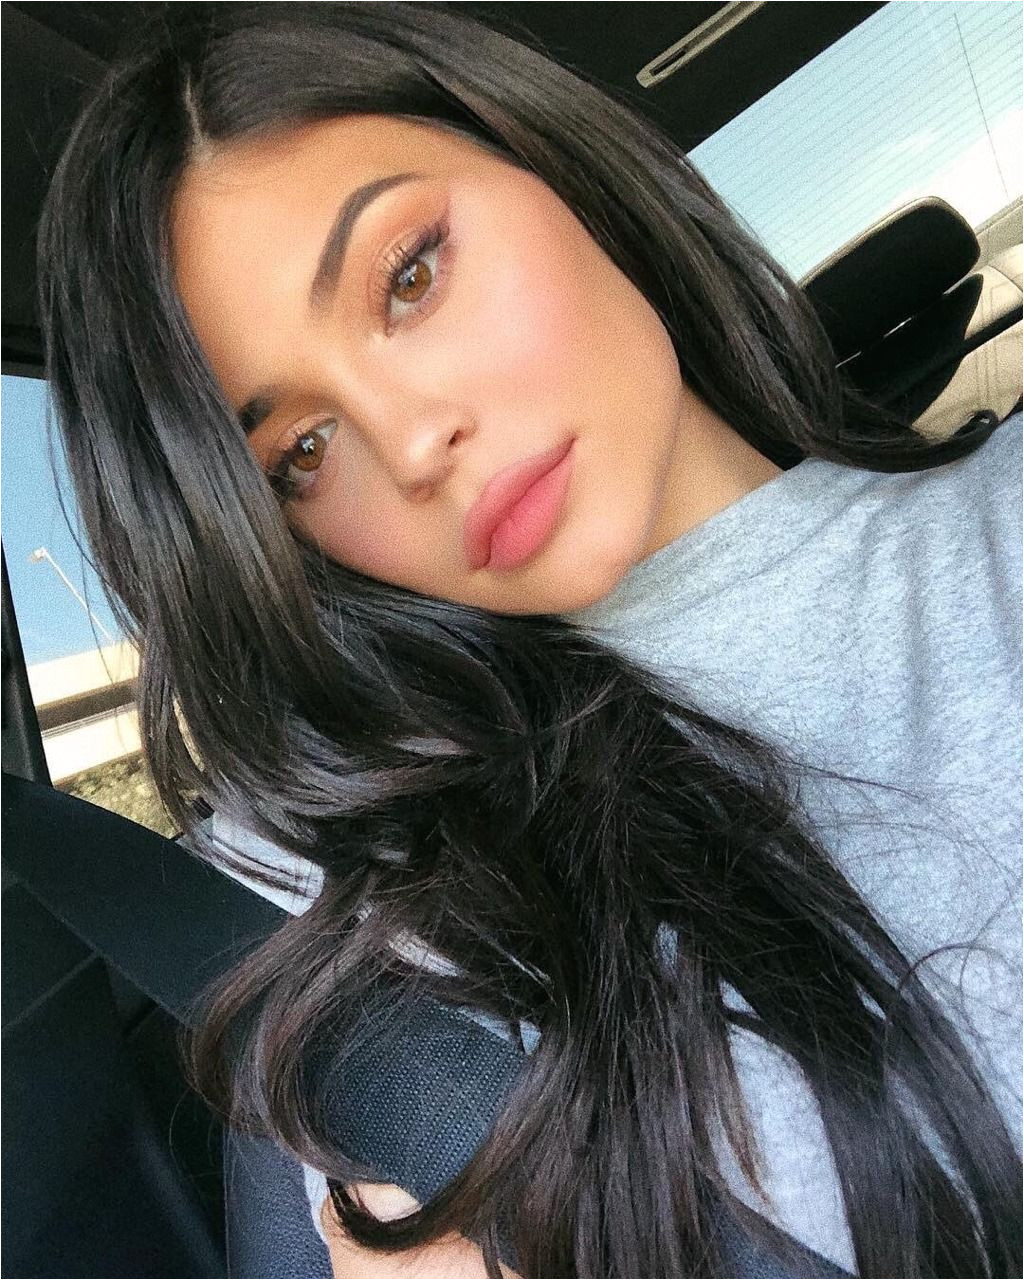 queenkyliek jenner “Kylie via Instagram “thanks for all the love and support on the KOURT X KYLIE launch today you guys are amazing restock updates